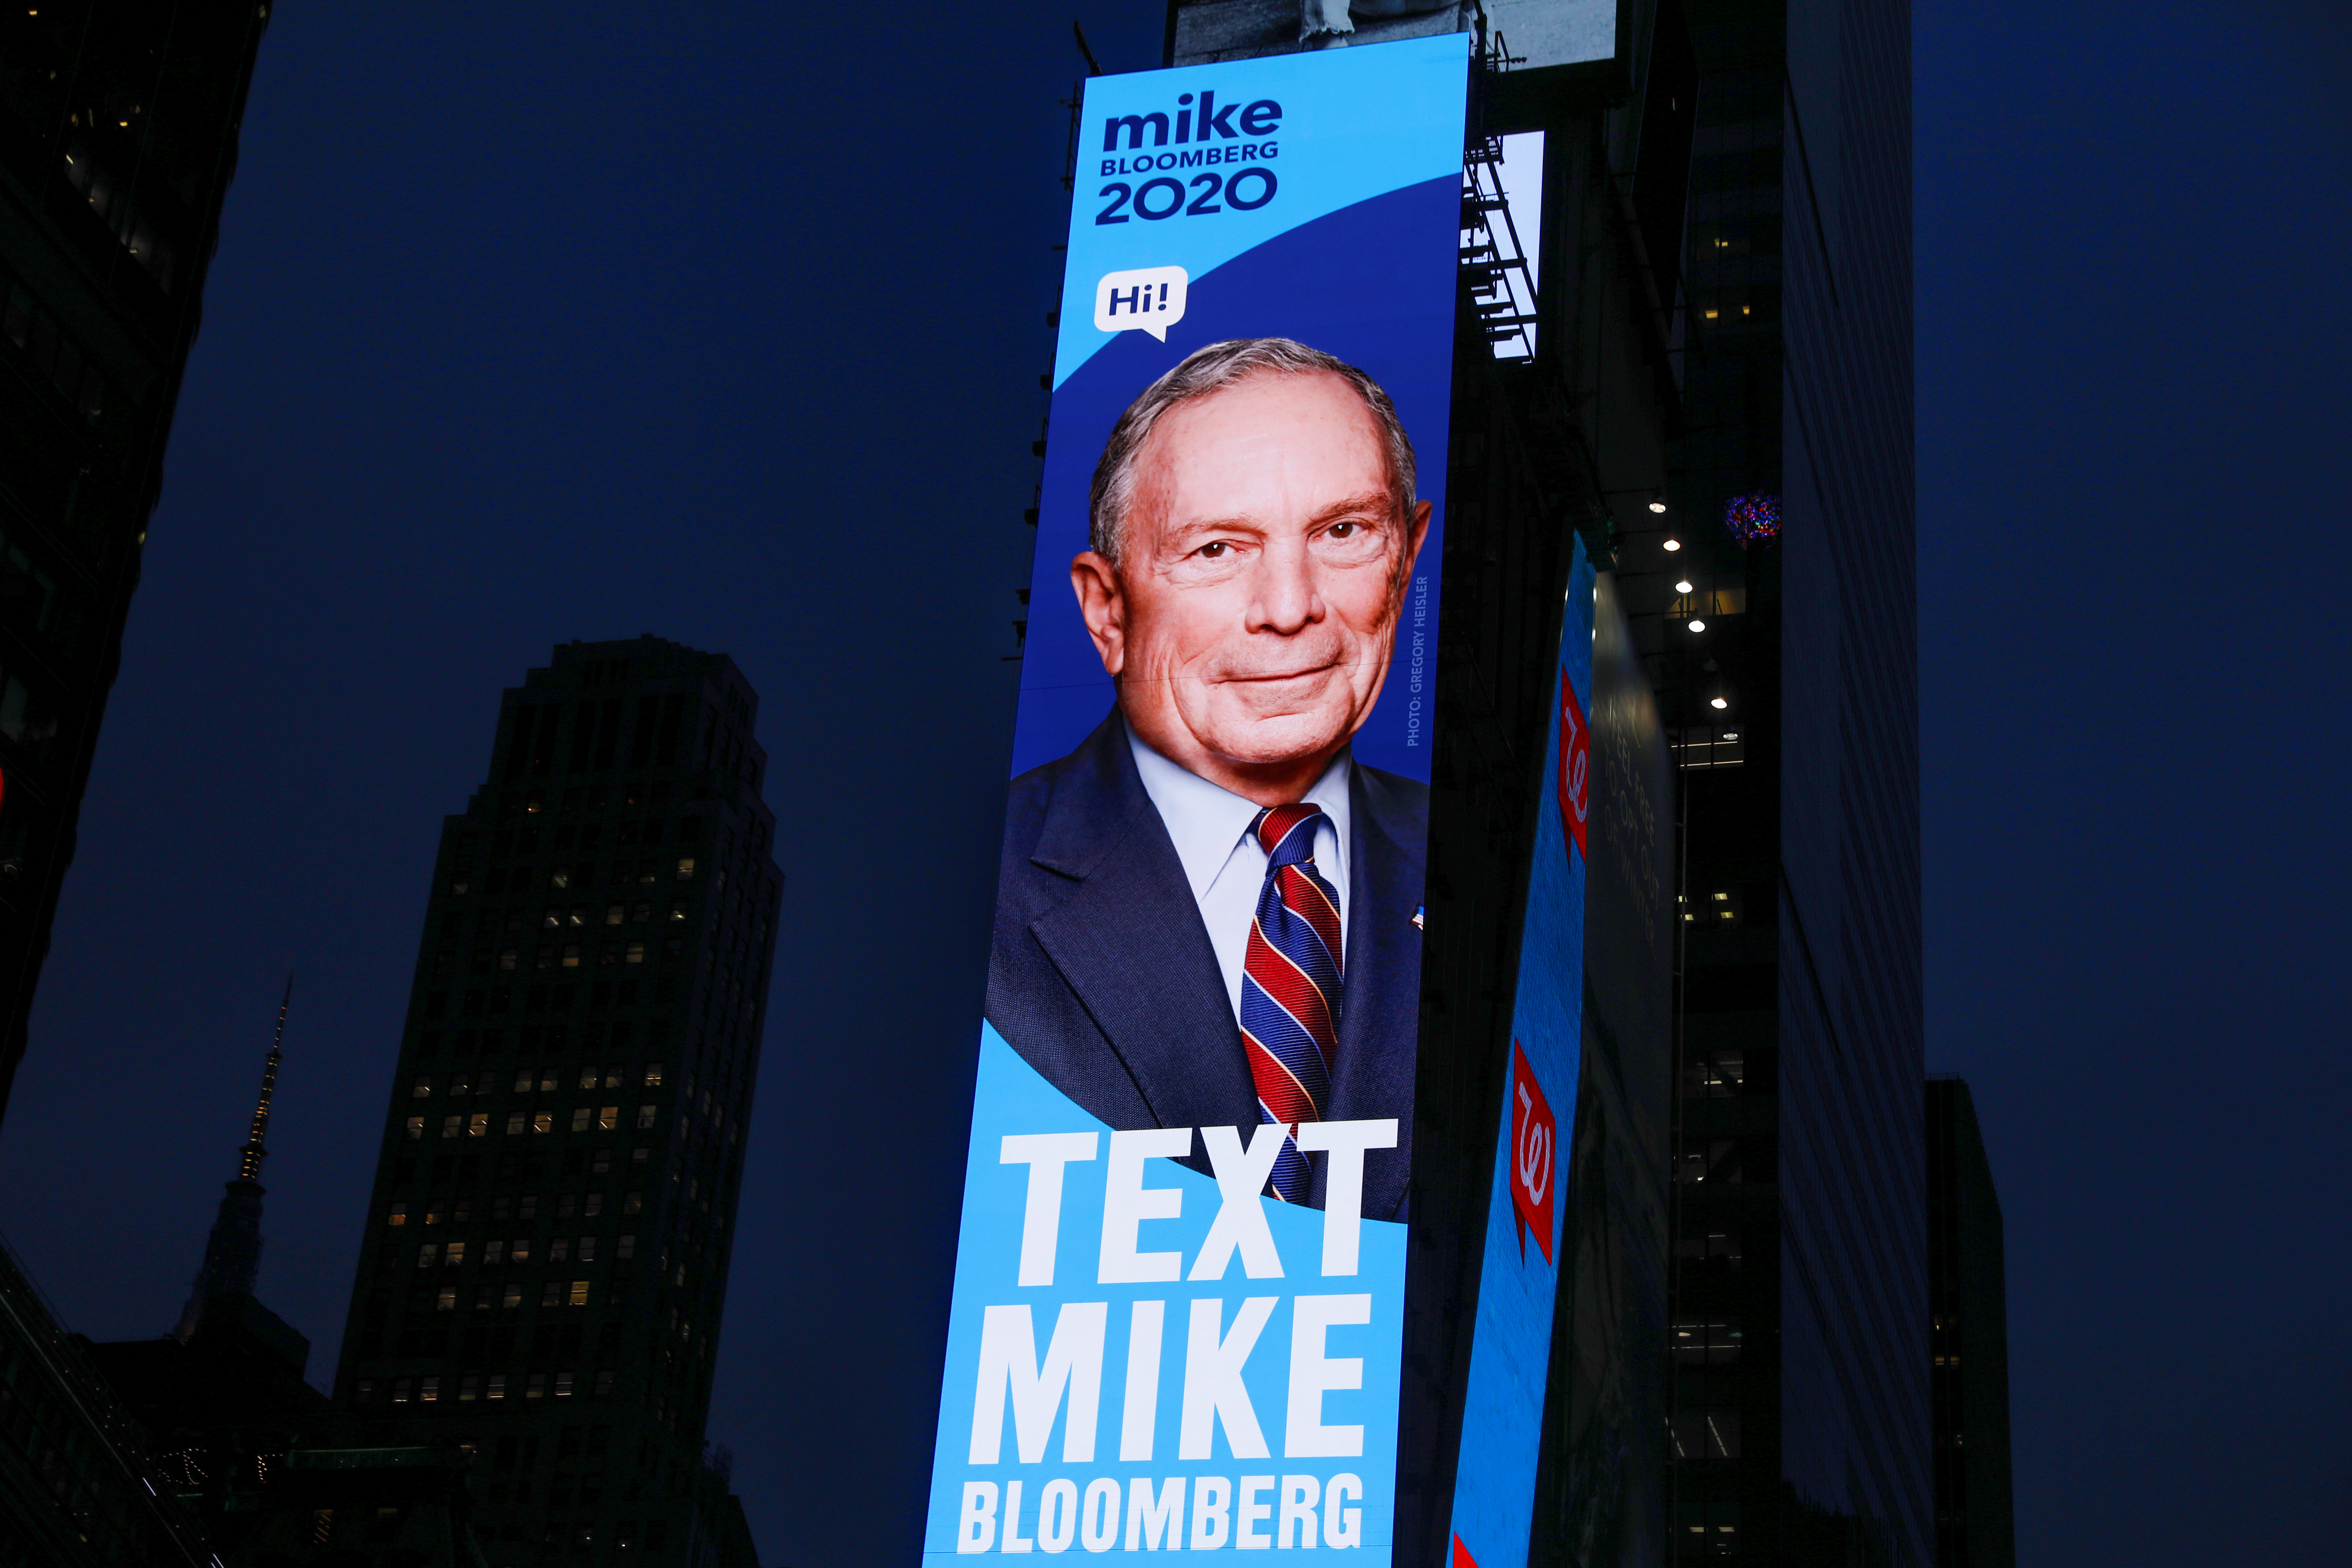 A billboard advertisement for Democratic 2020 U.S. presidential candidate and former New York City Mayor Mike Bloomberg is seen in Times Square in the Manhattan borough of New York City, New York, U.S., March 2, 2020. REUTERS/Andrew Kelly